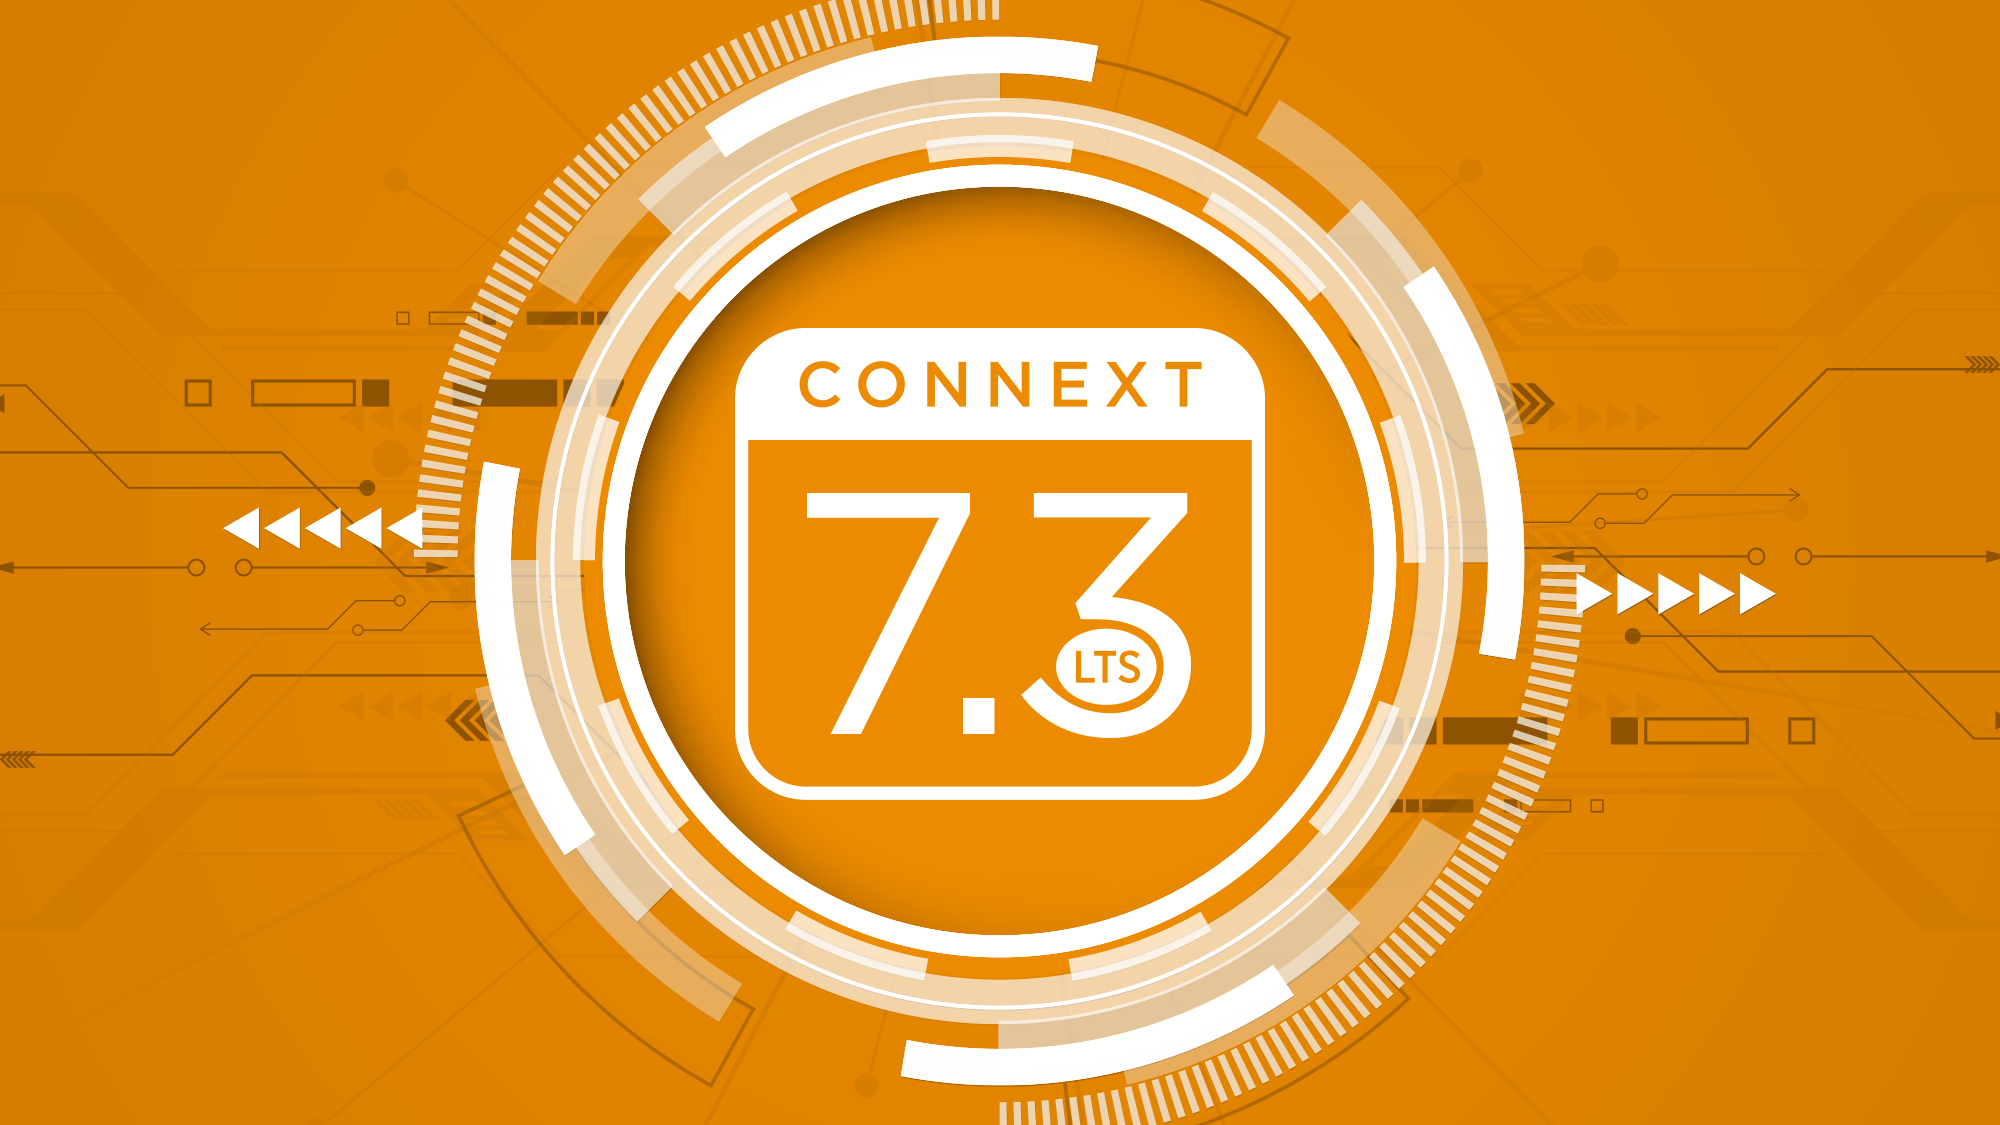 Unveiling RTI Connext 7.3 LTS: The Key to Smarter, Observable and Secure DDS Applications